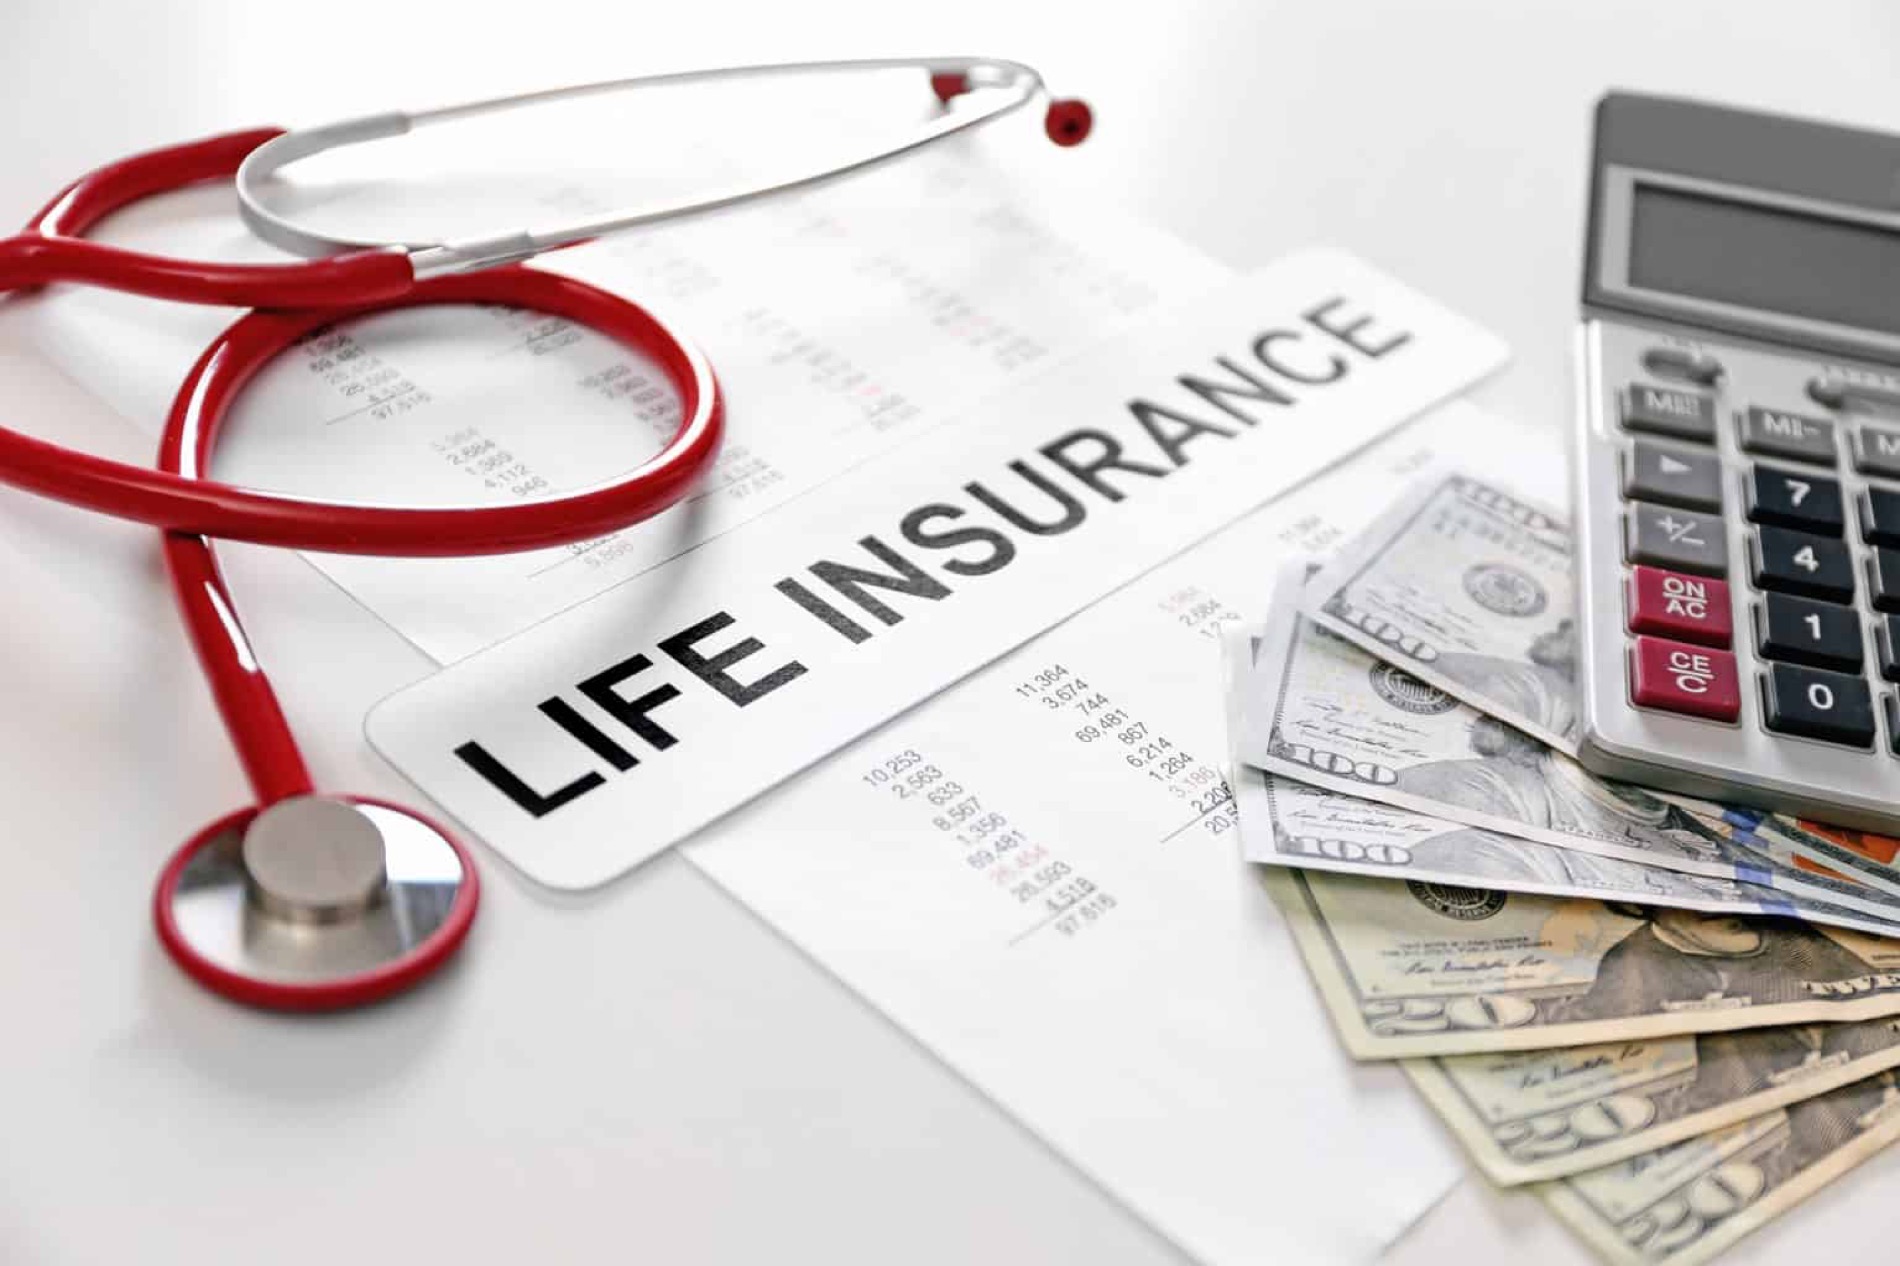 Pile of money sitting under a calculator on a table next to a red stethoscope and a sign reading "life insurance."